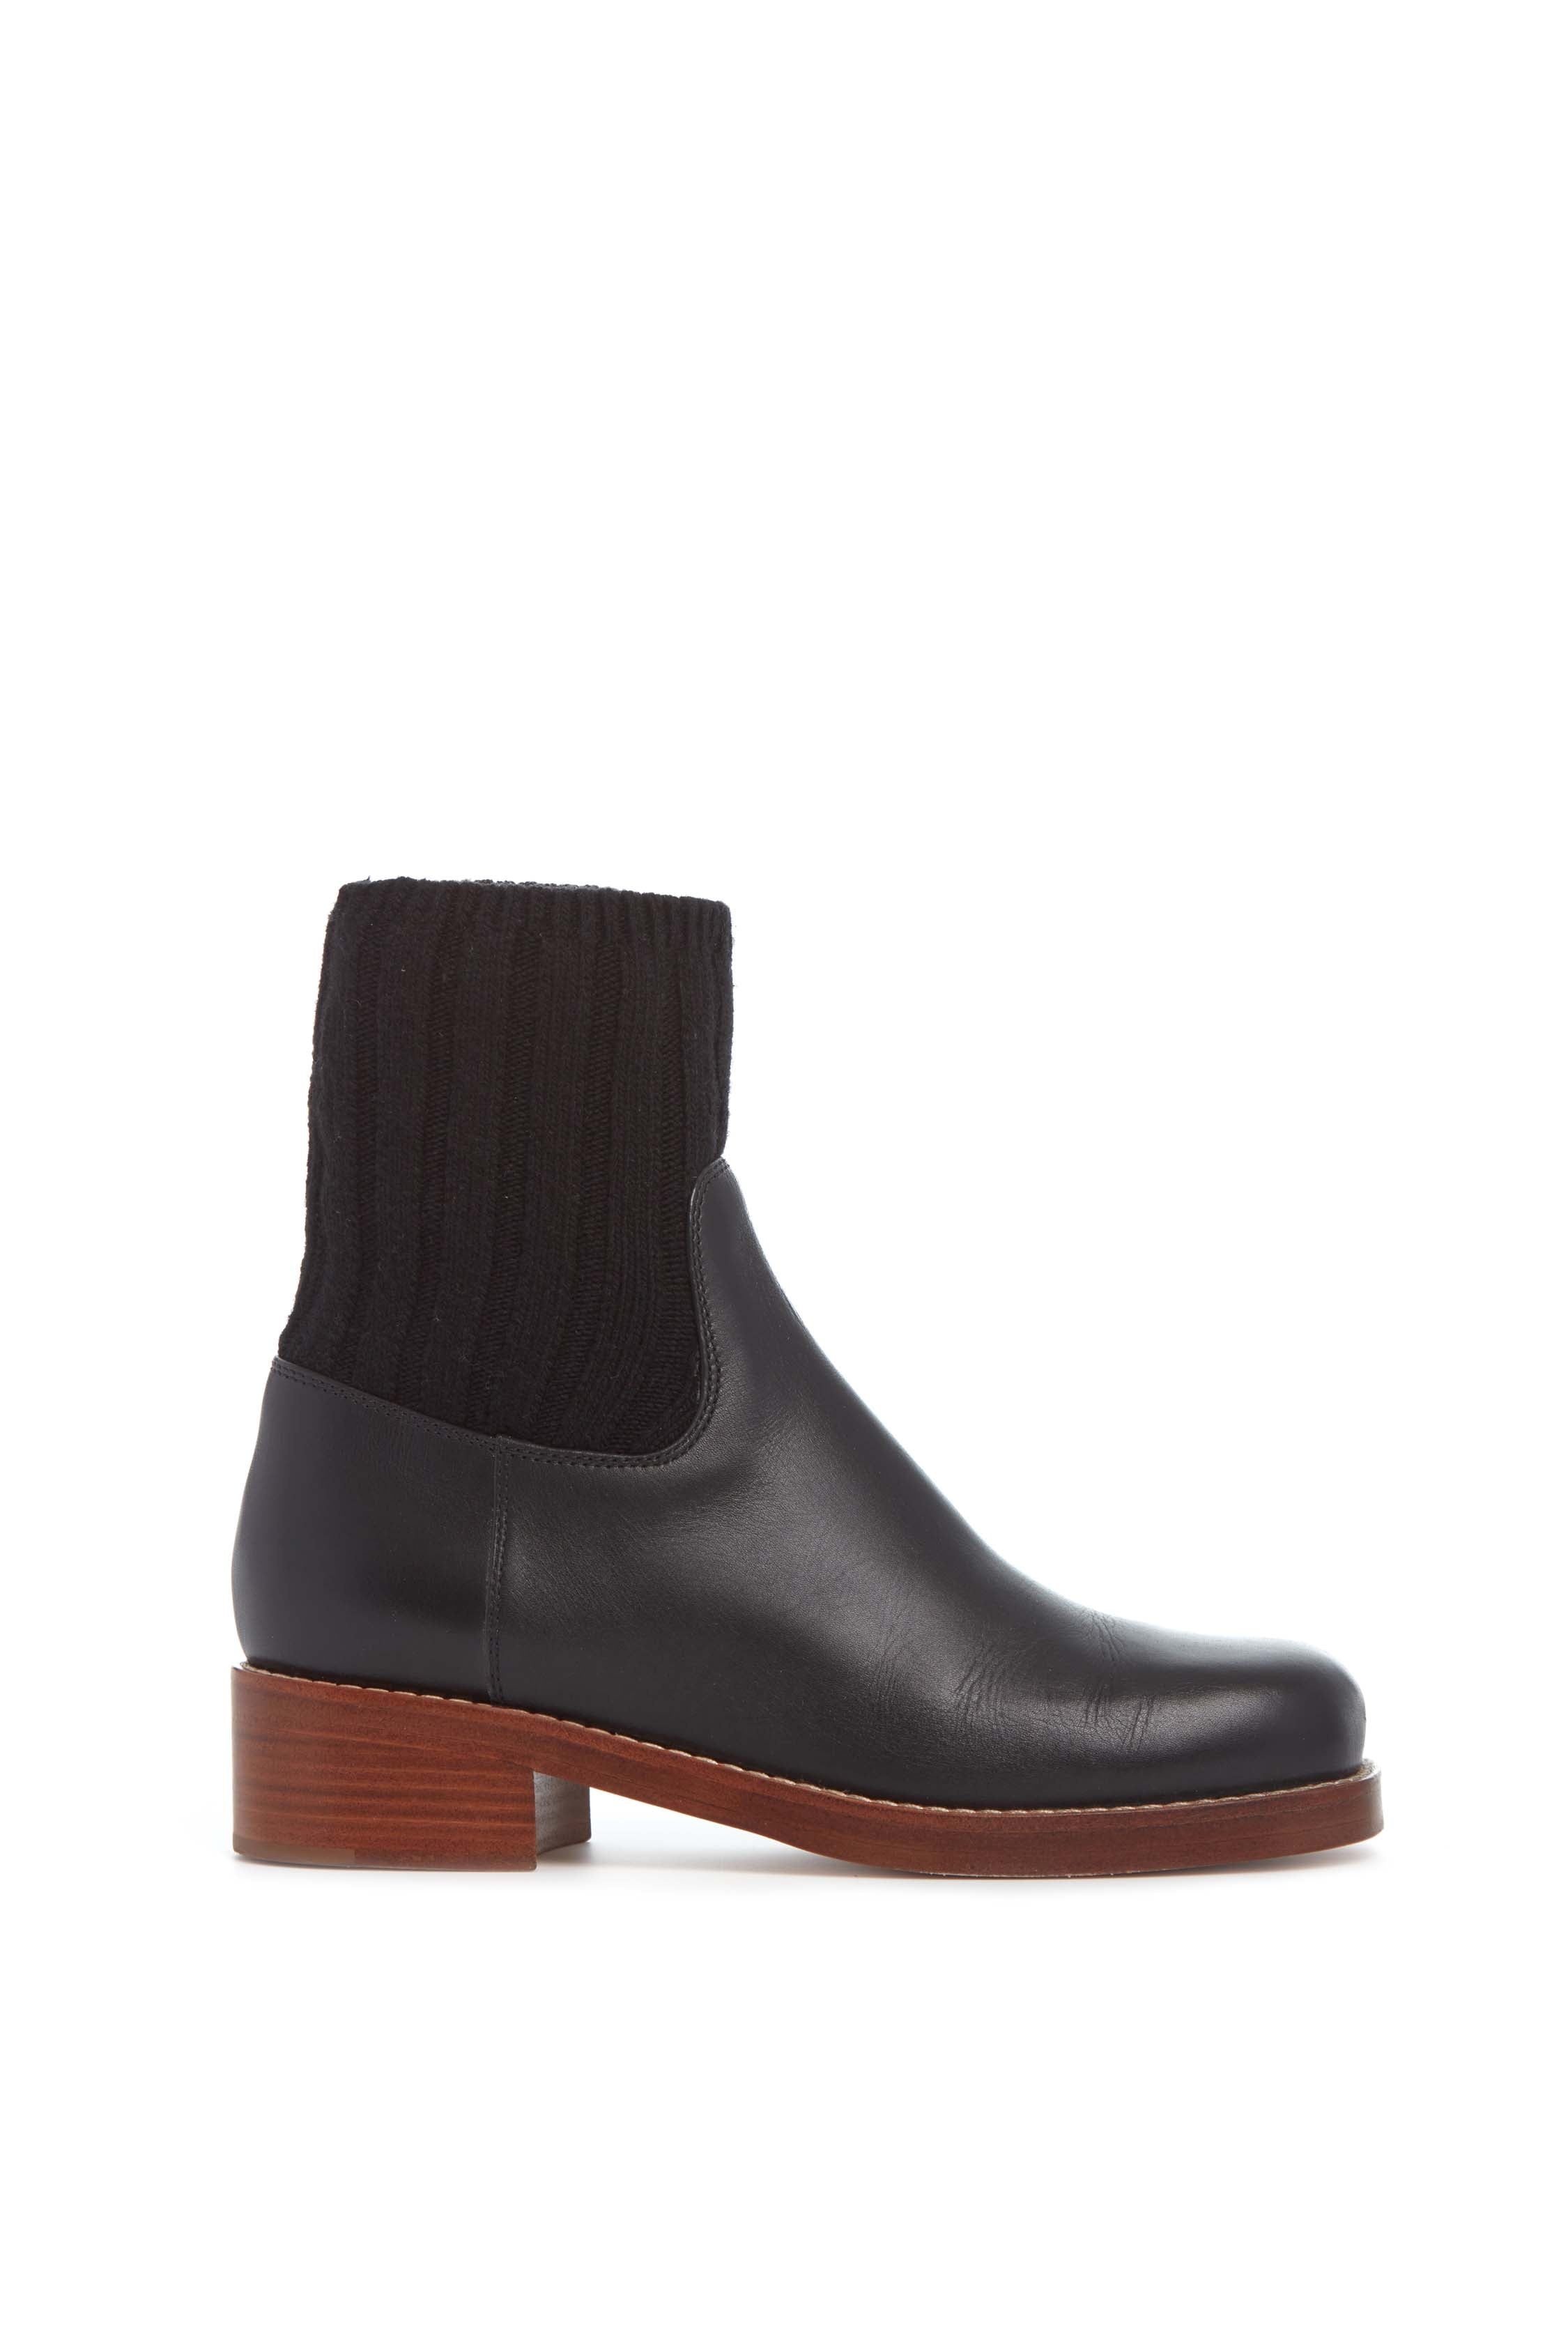 Hobbes Sock Boot in Black Leather & Cashmere - 1